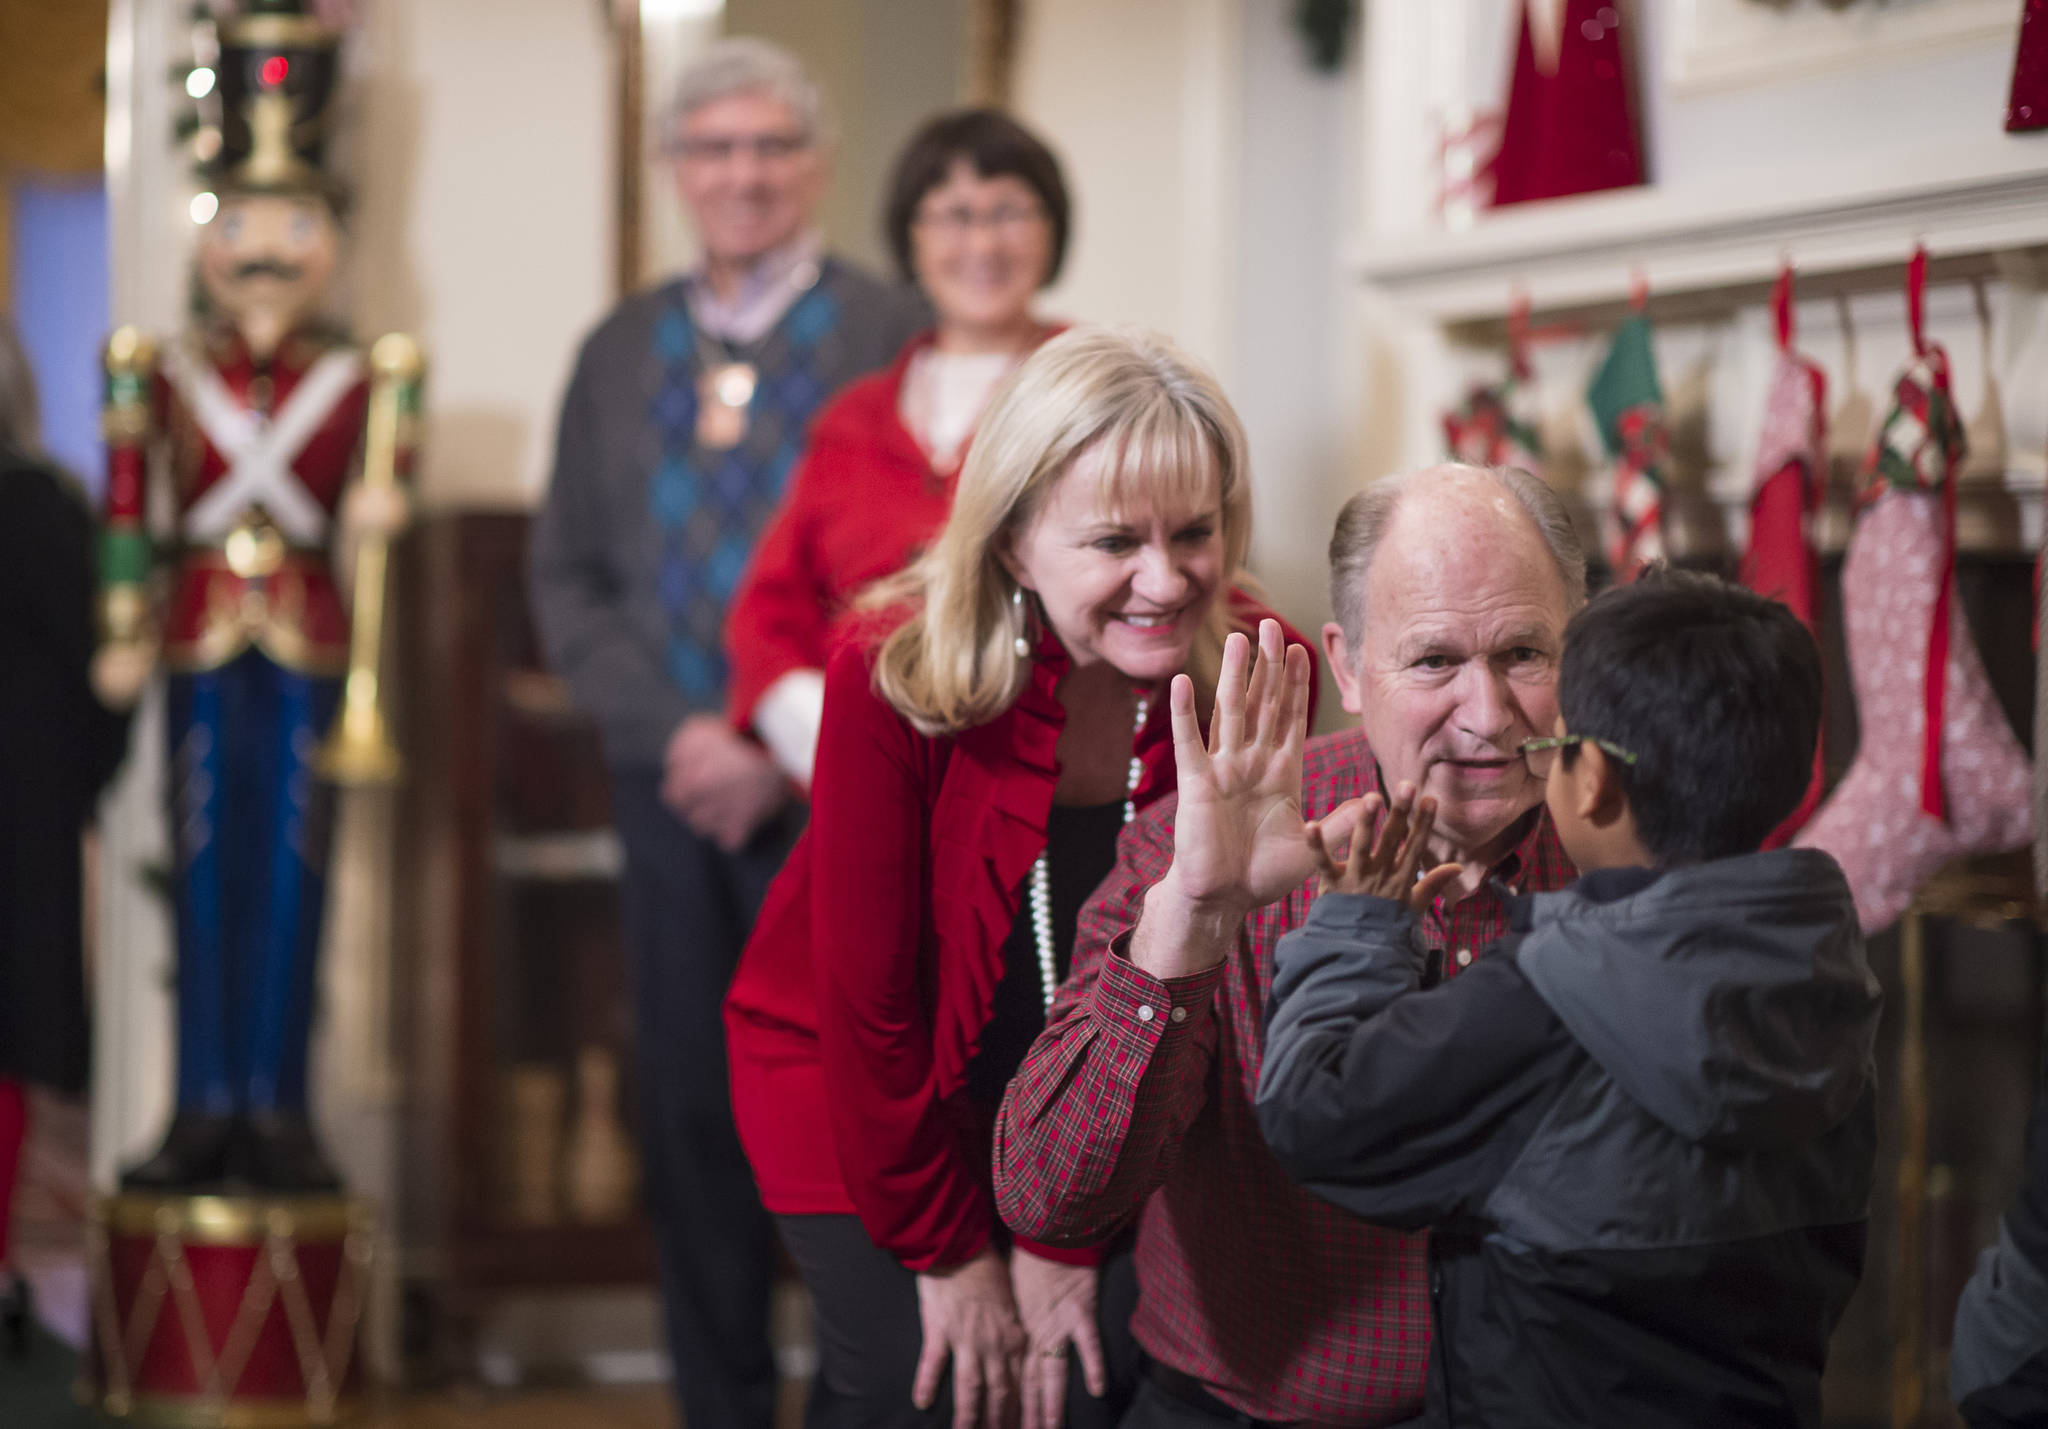 Gov. Bill Walker and his wife, Donna, gets a greeting from Henry Olmstead as he arrives for the Governor’s Open House on Tuesday, Dec. 5, 2017. Lt. Gov. Byron Mallott and his wife, Toni, were also there for the annual opening. (Michael Penn | Juneau Empire)